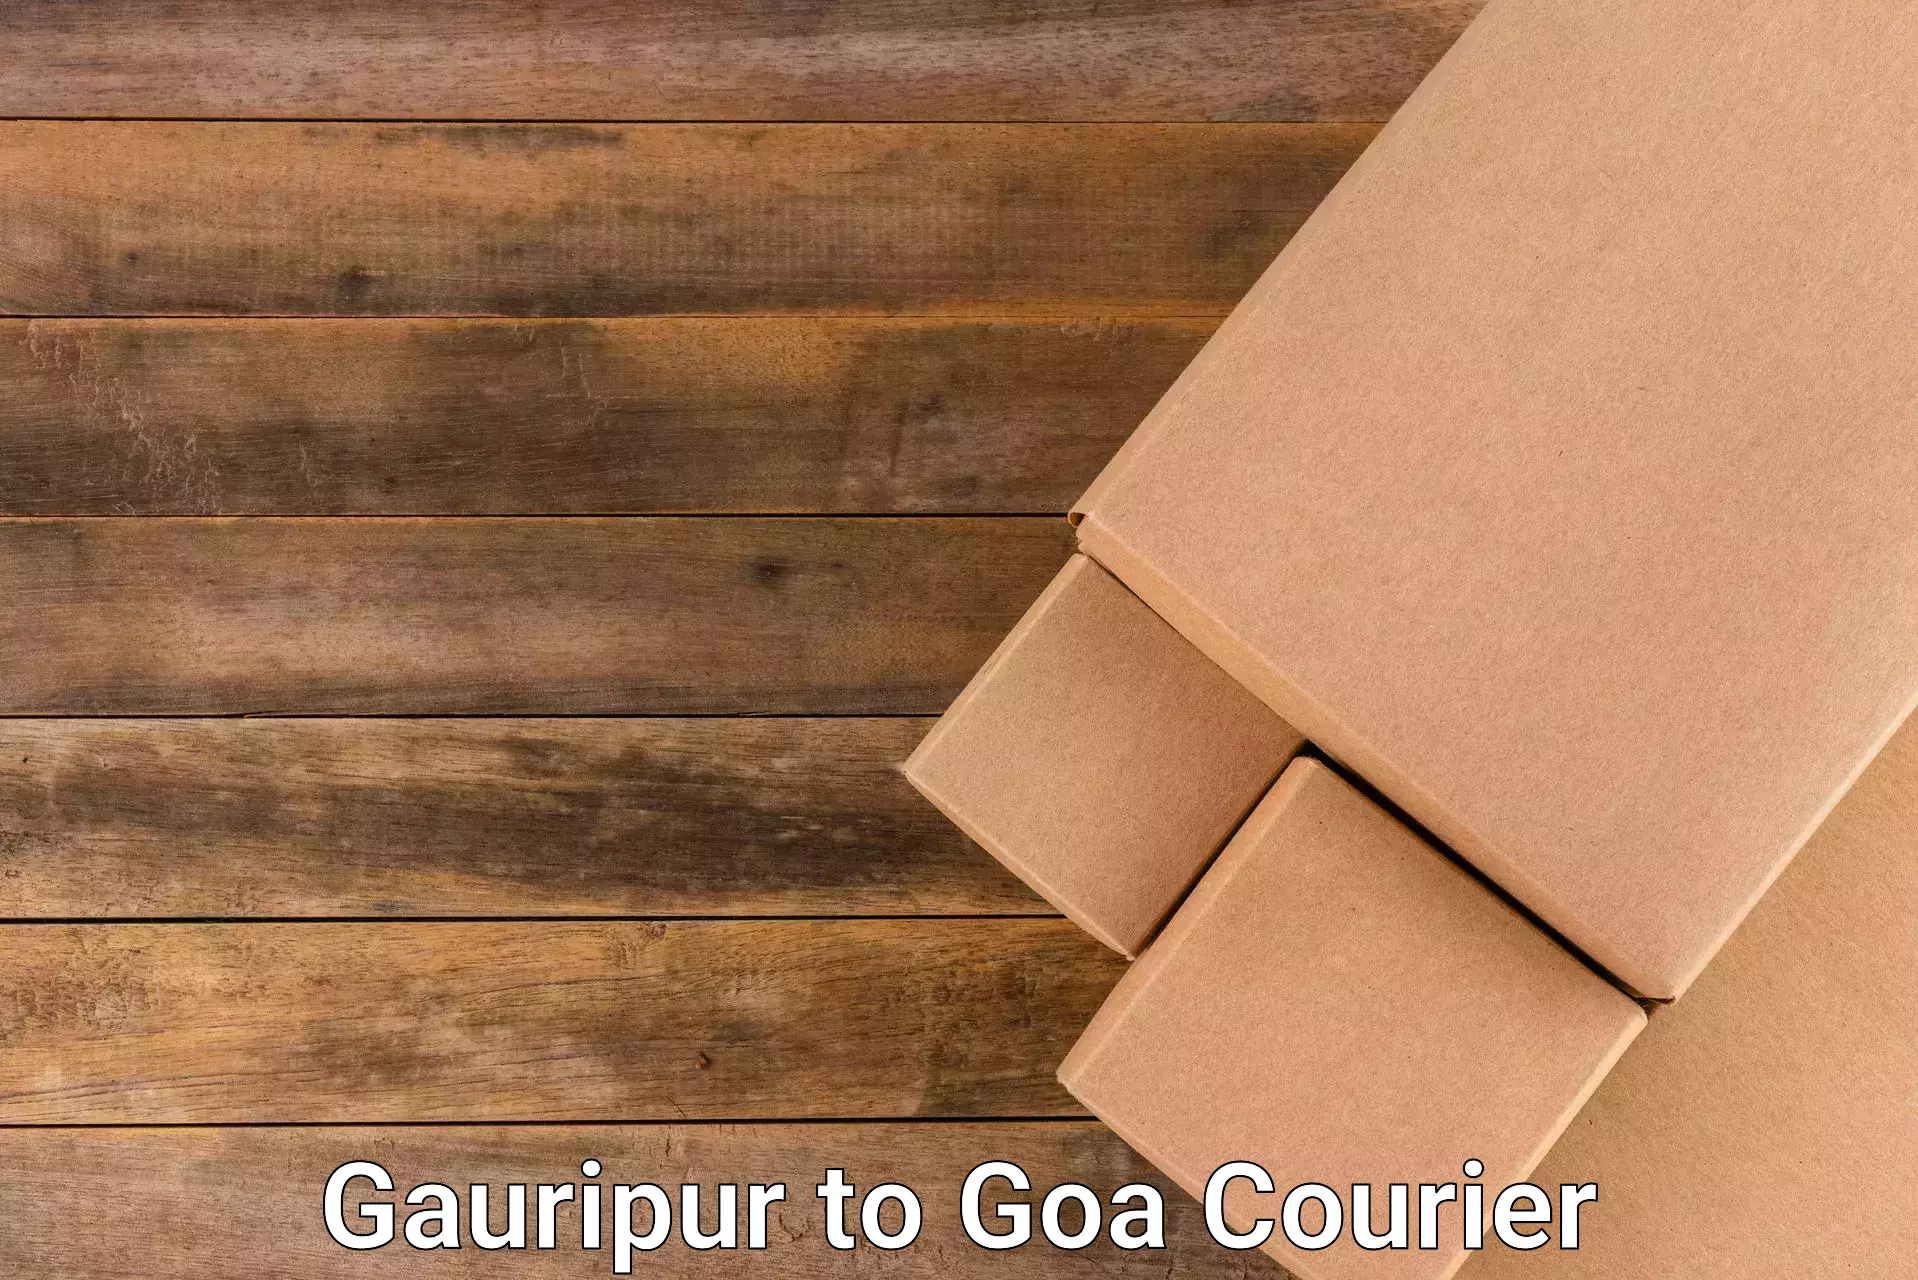 User-friendly delivery service Gauripur to Goa University